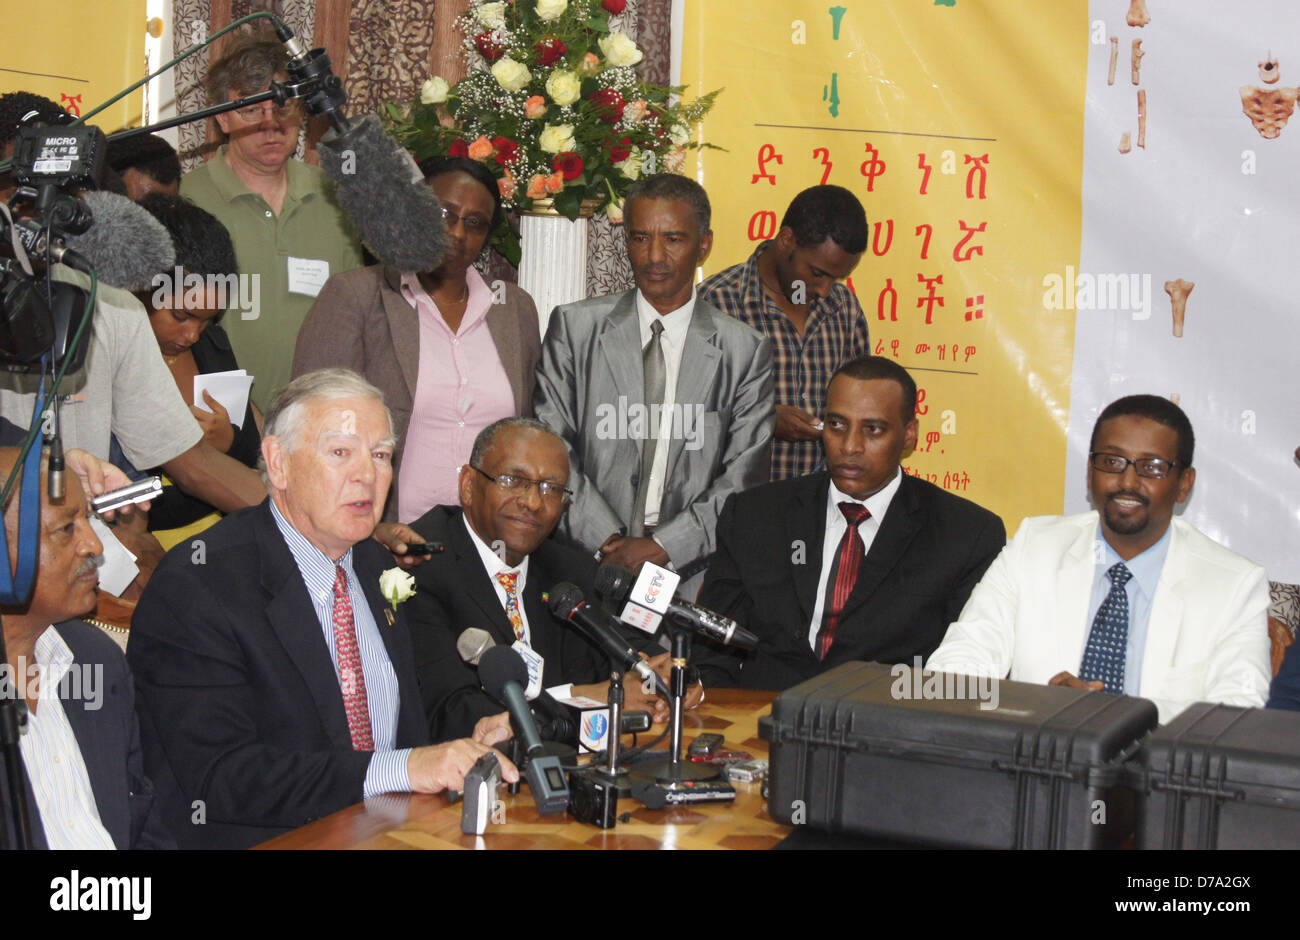 The discoverer of the world famous fossil called 'Lucy', Donald Johanson (L), sits amongst a group of Ethiopian politicians and experts attends a press conference in Addis Ababa, Ethiopia, 1 Mai 2013. The press conference took place on the occasion of the return of Lucy's remains to Ethiopia. The gray boxes on the table contain the remains of Lucy's 3.2 million year old sceleton. Photo: Carola Frentzen Stock Photo